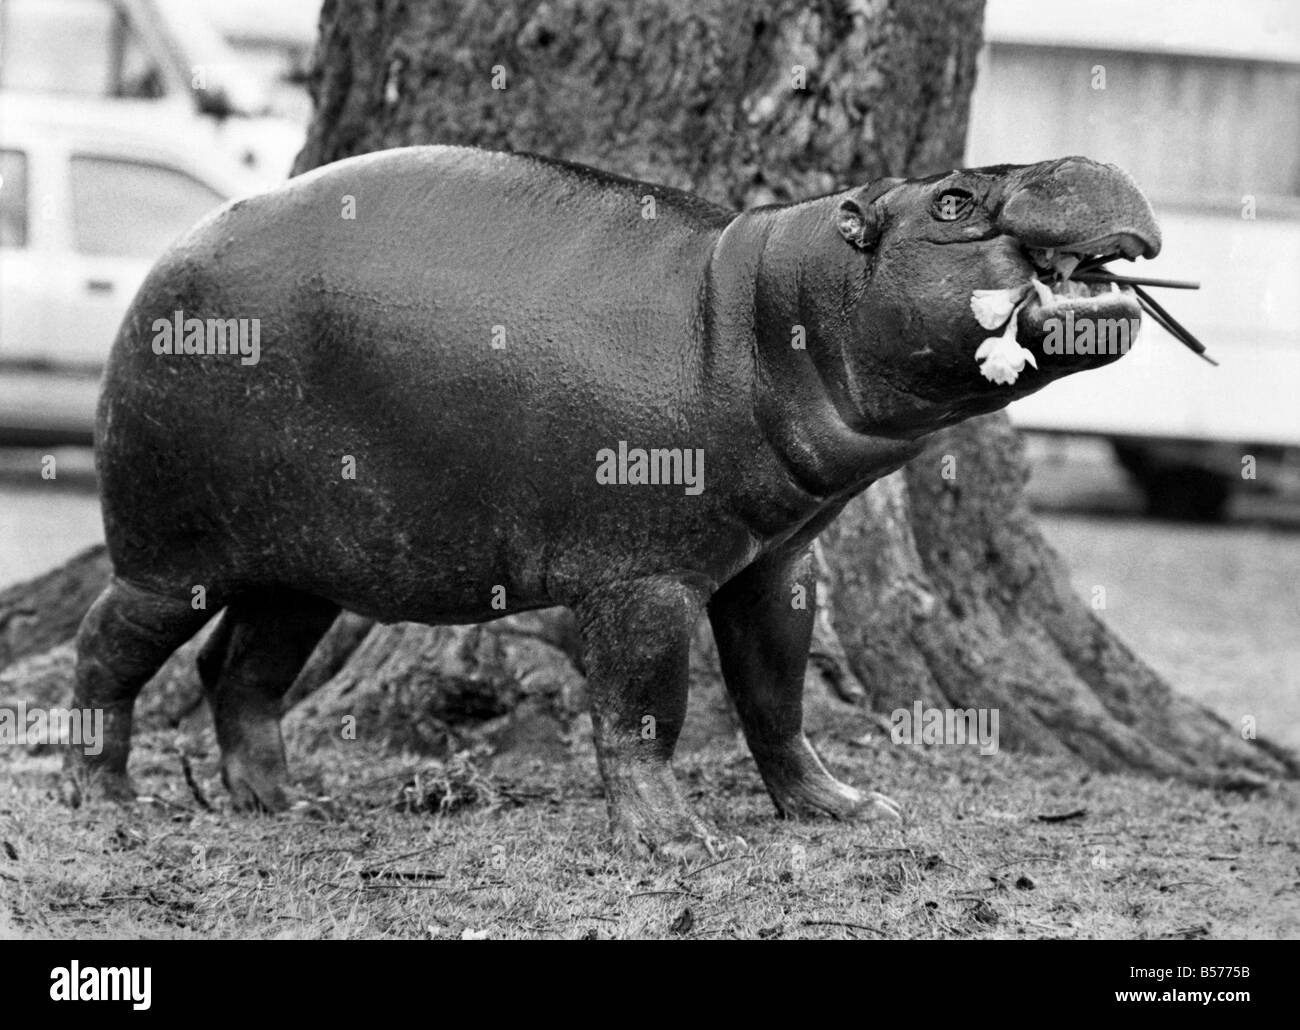 Where have all the flowers gone?, asks 23 years old Linda Ferry, a midget clown working with Gandy's travelling circus, as she peers into the open jaws of April, the four year old pygmy hippopotamus who is a star performer with the circus. March 1985 P004875 Stock Photo